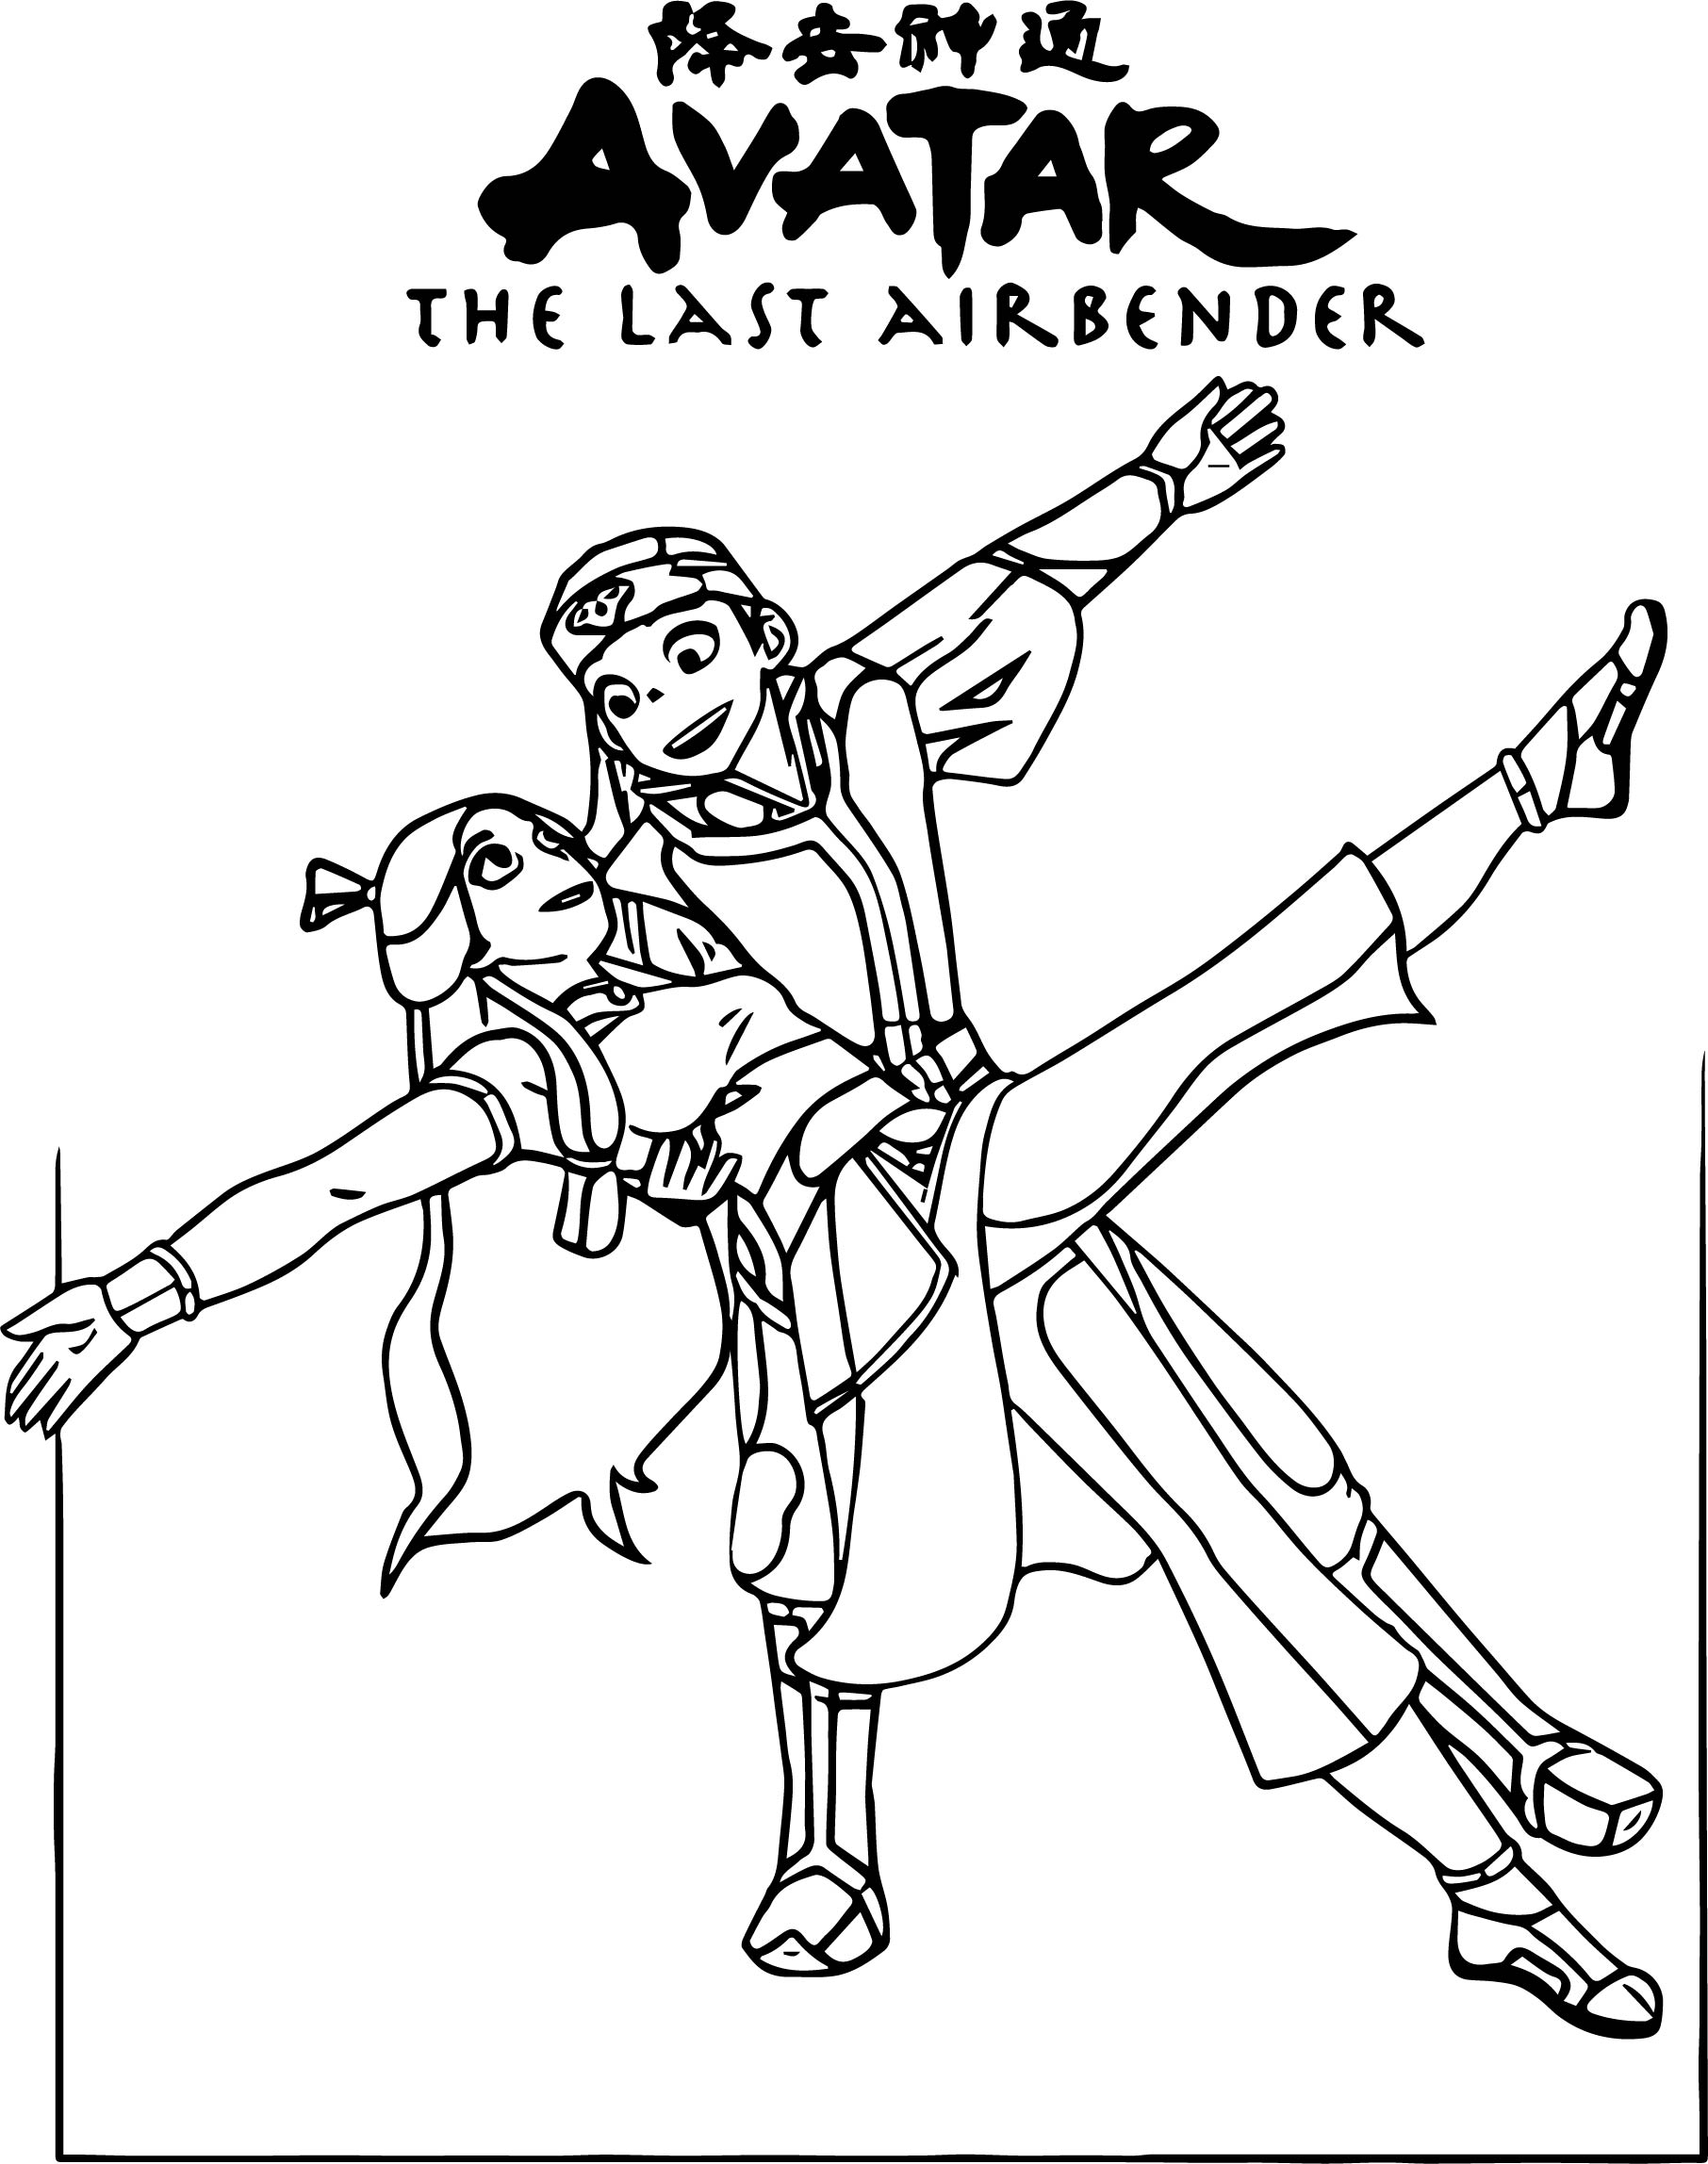 Avatar The Last Airbender Coloring Pages Free Pdf - Aang And Katara Kuro Avatar The Last Airbender Coloring Pages